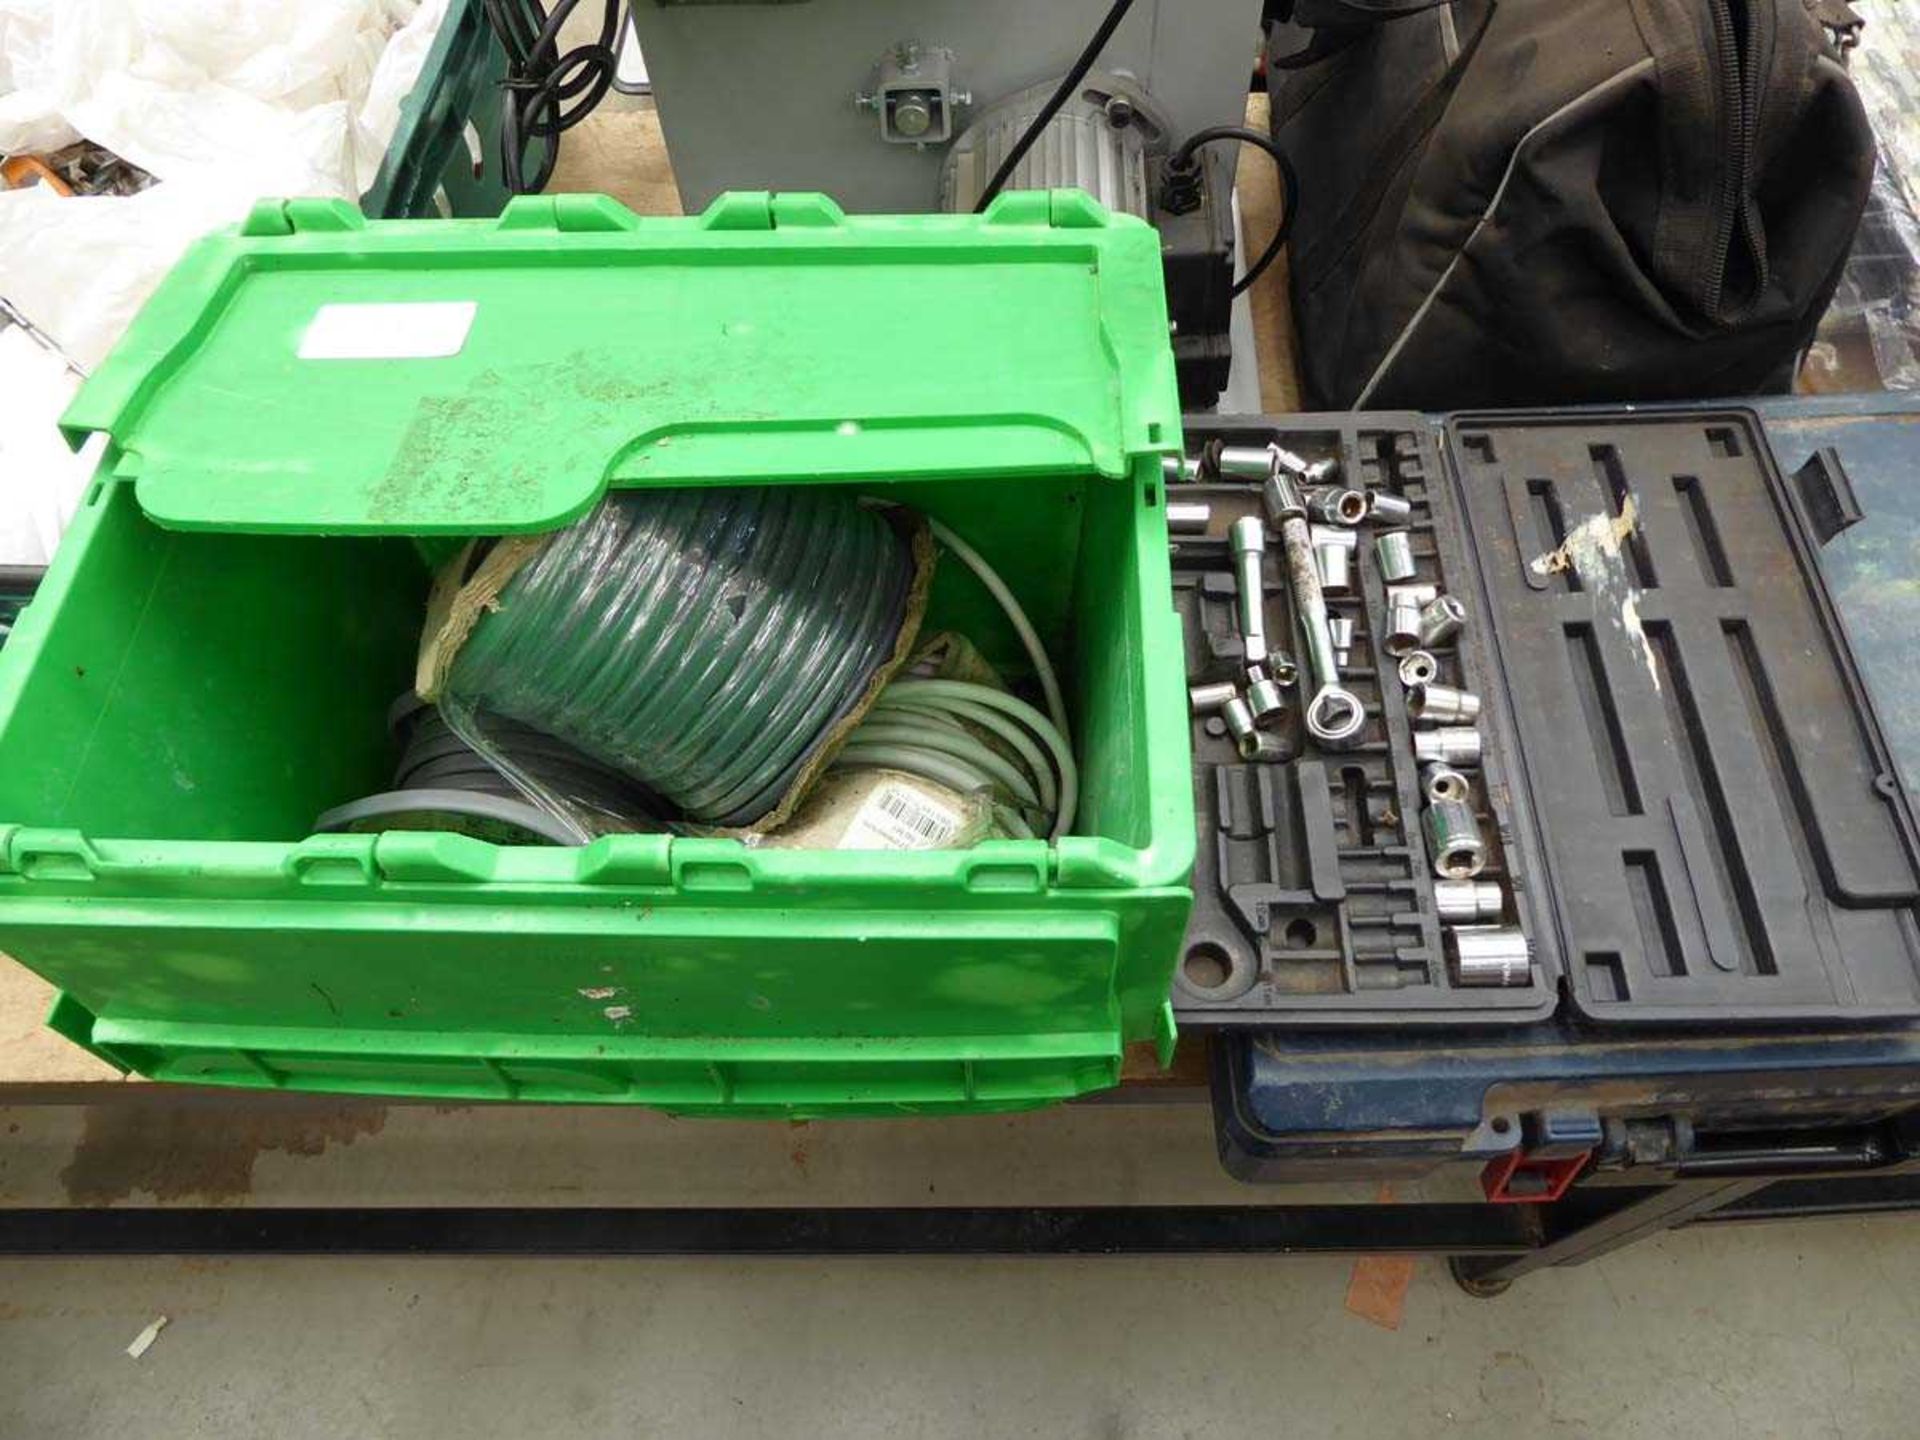 Box containing cable and small socket set